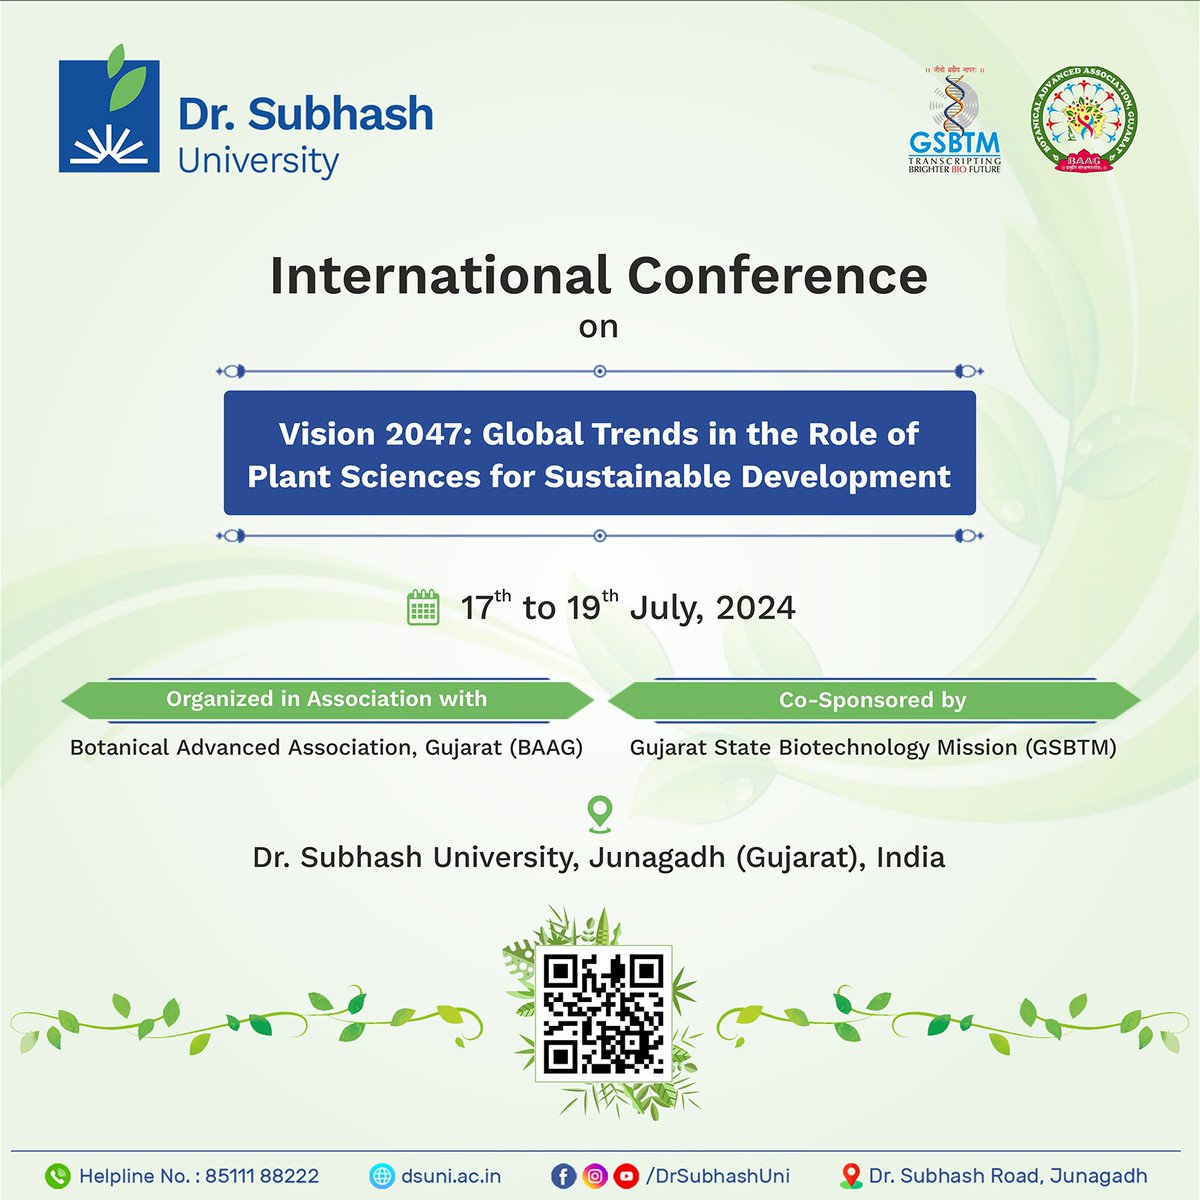 Unlock the potential of plant sciences for a sustainable tomorrow! 🌱 Don't miss the International Conference on Vision 2047, hosted by DSU from July 17th to 19th. #Vision2047 #BAAG #Internationalconference #SustainableDevelopment #PlantScience #DSU #DrSubhashUniversity